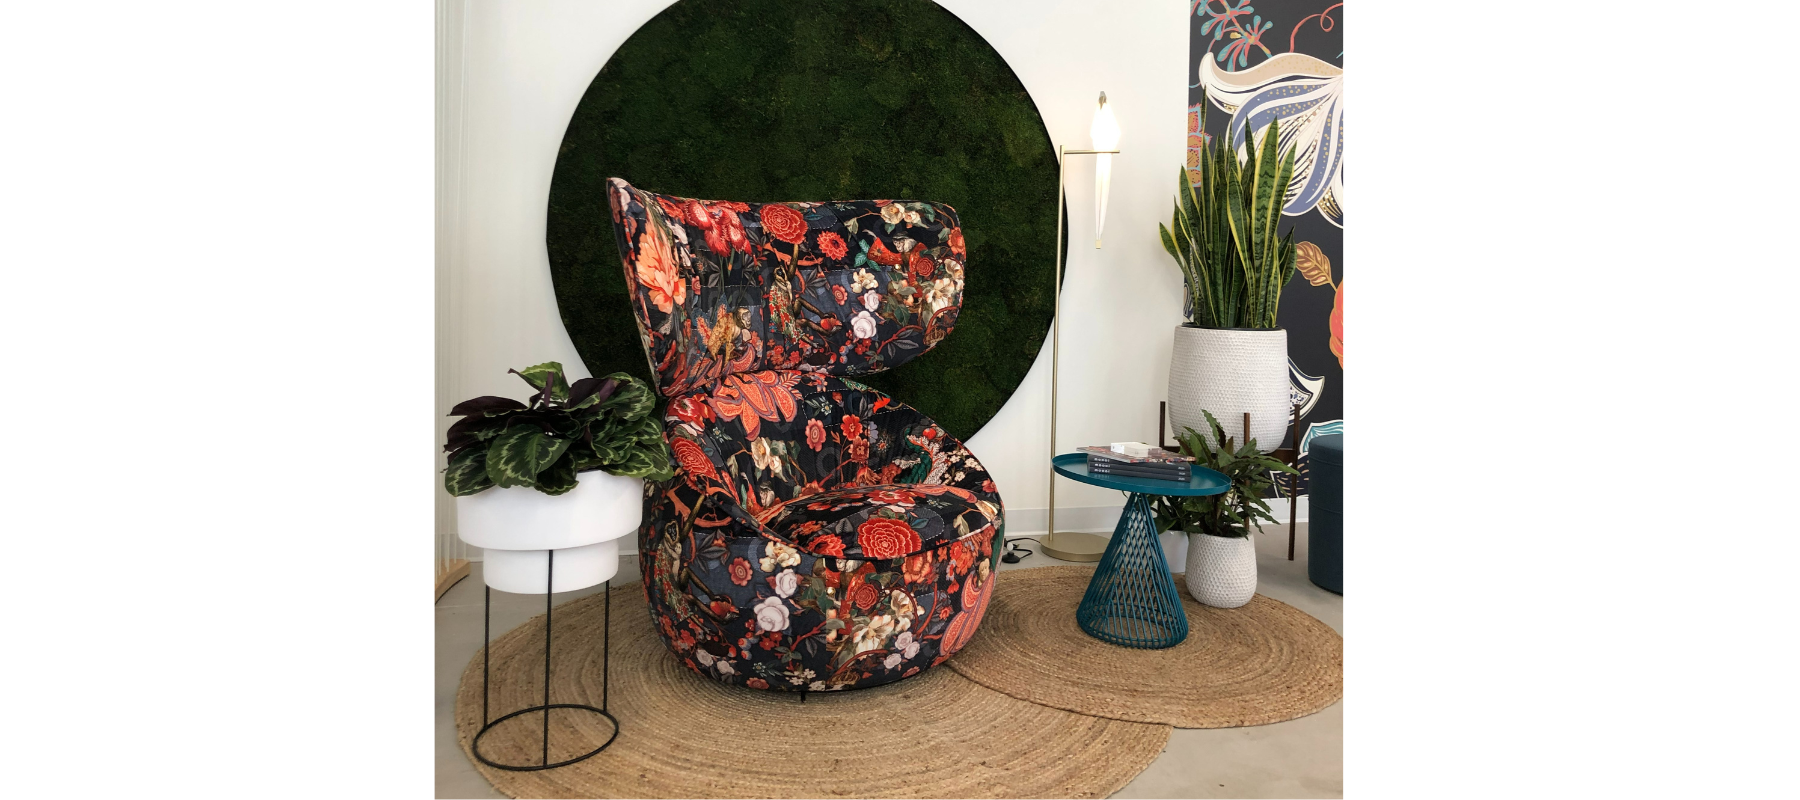 an oversized lounge chair with a red upholstery with animals on it, a moss wall behind and a standing lamp shaped like a bird